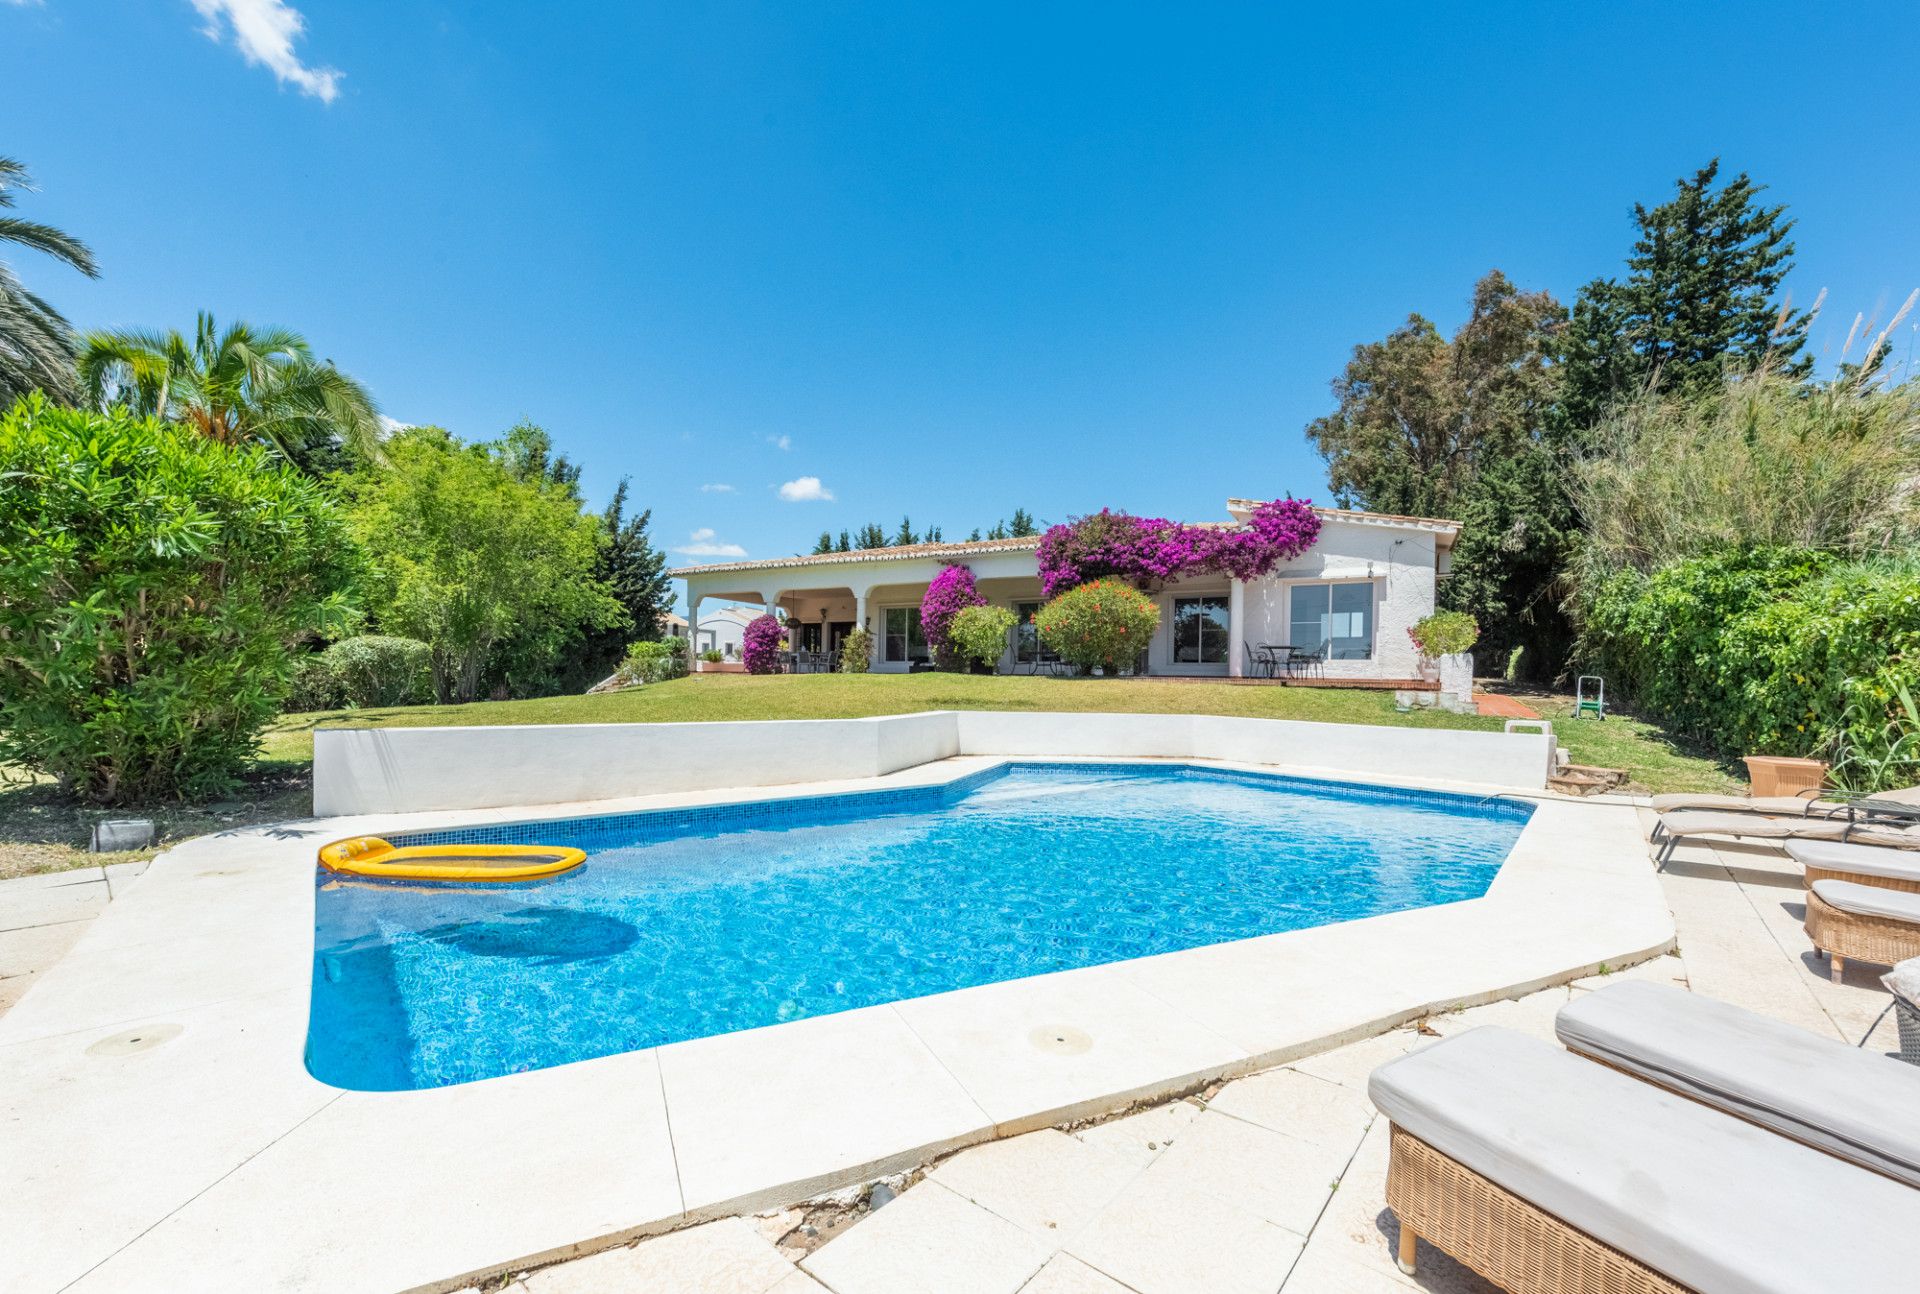 Andalucian style villa with a large plot of 1.700sq.m. located close to Atalaya Golf Club! Great investment opportunity!